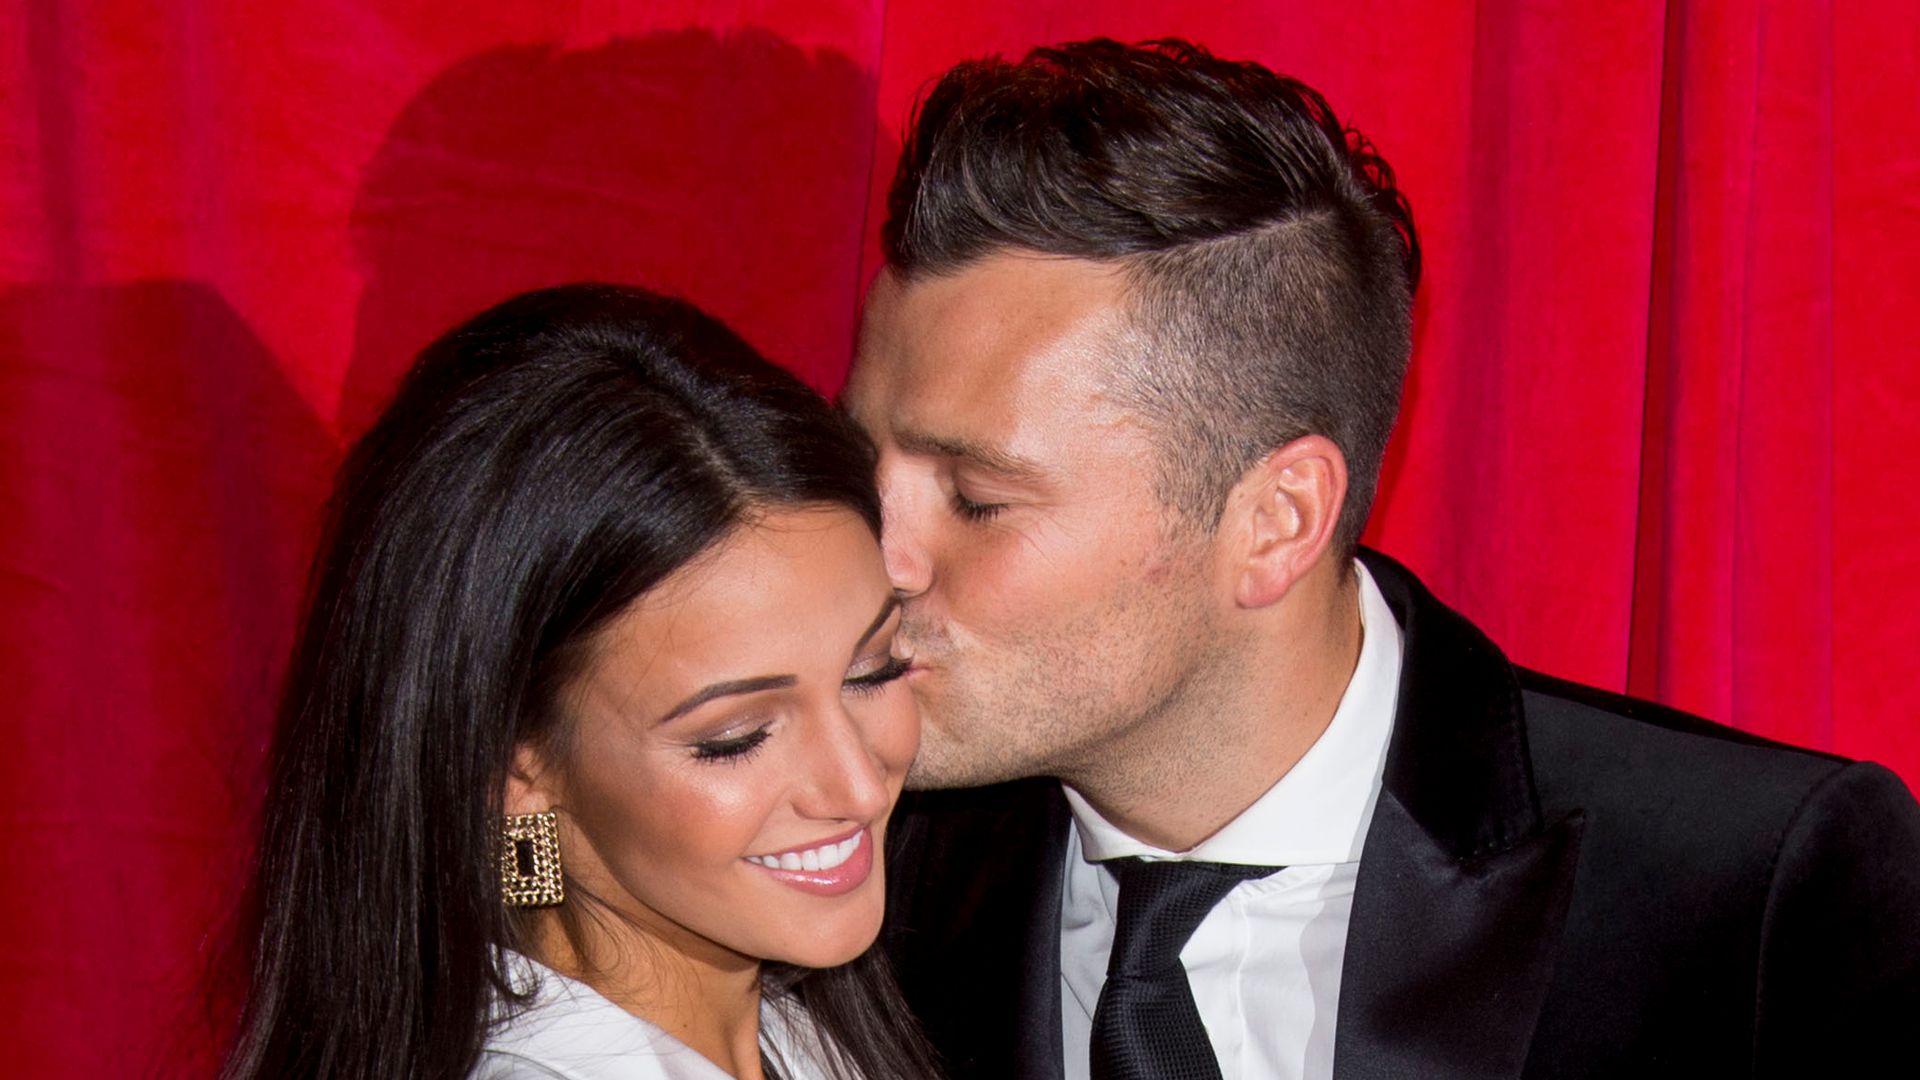 Michelle Keegan and Mark Wright reunite in Australia for rare date night outing